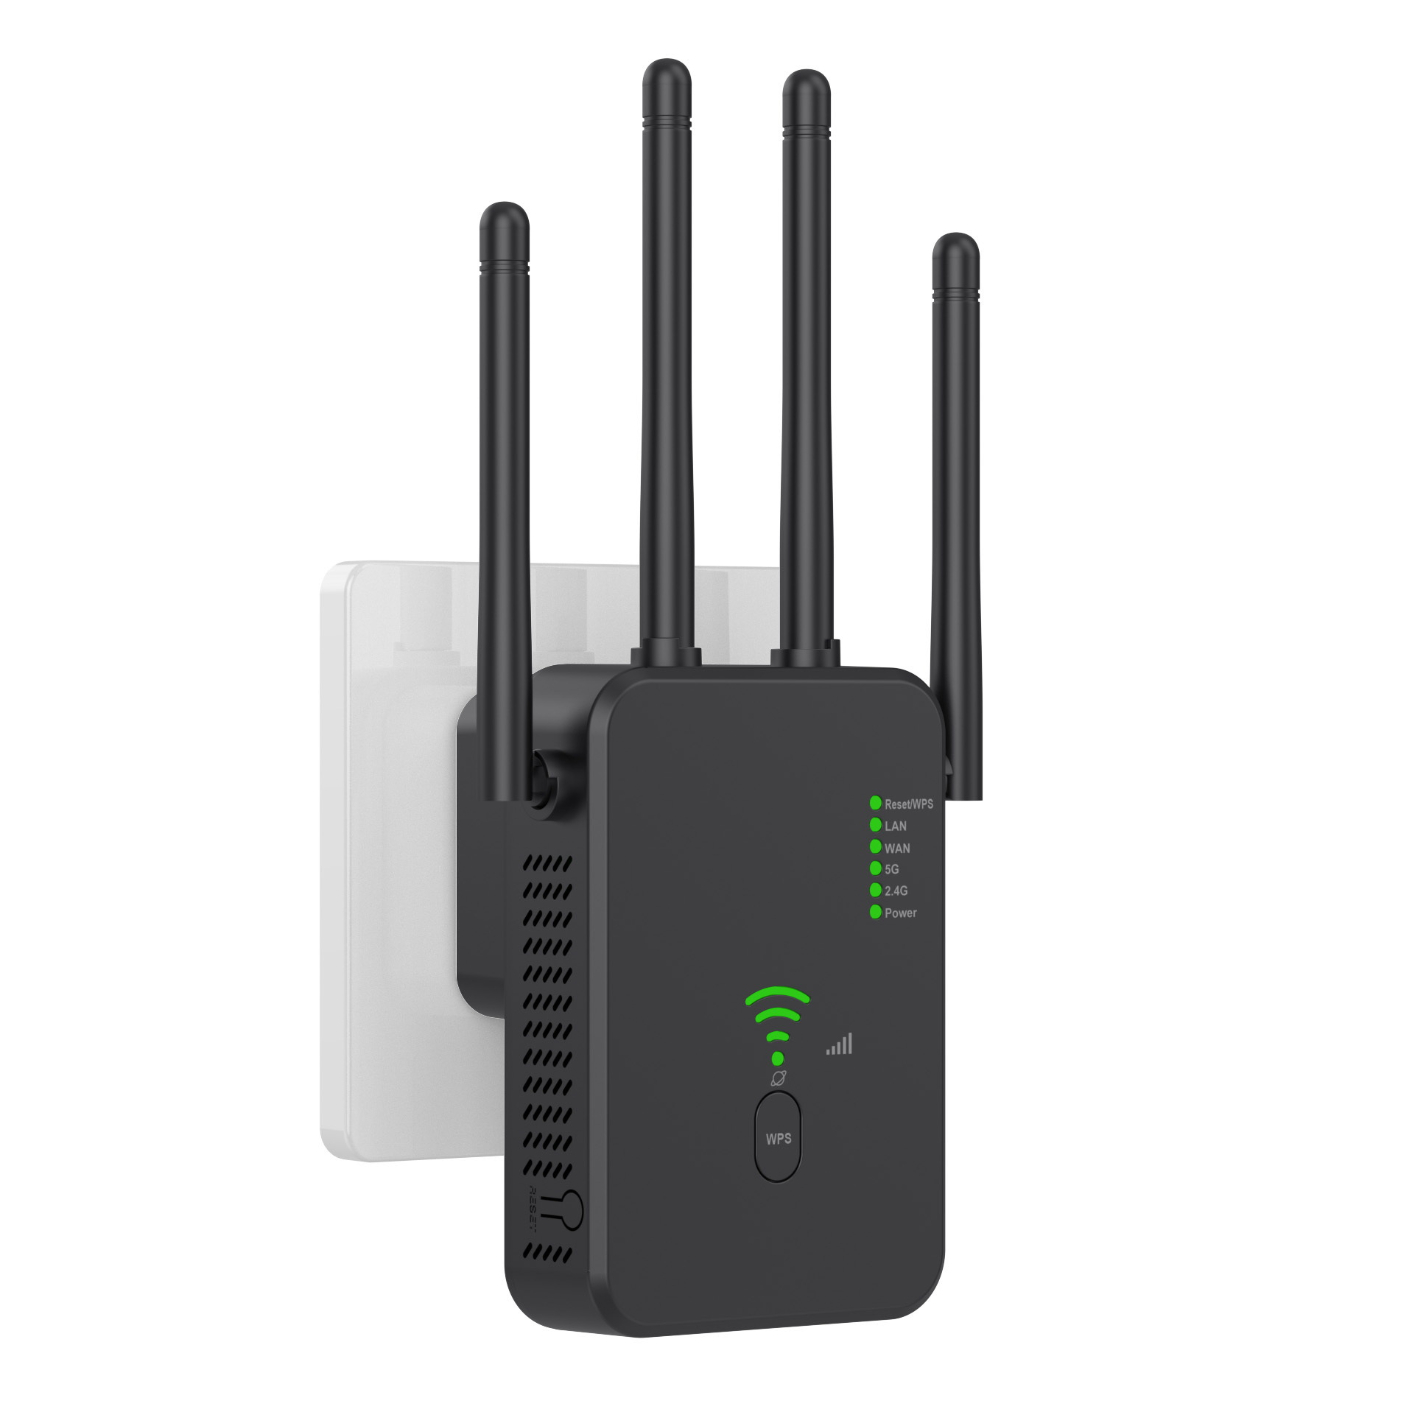 5Ghz Wireless WiFi Repeater 1200Mbps Router Wifi Booster 2.4G Long Range Extender 5G Wi-Fi Signal Amplifier Repeater